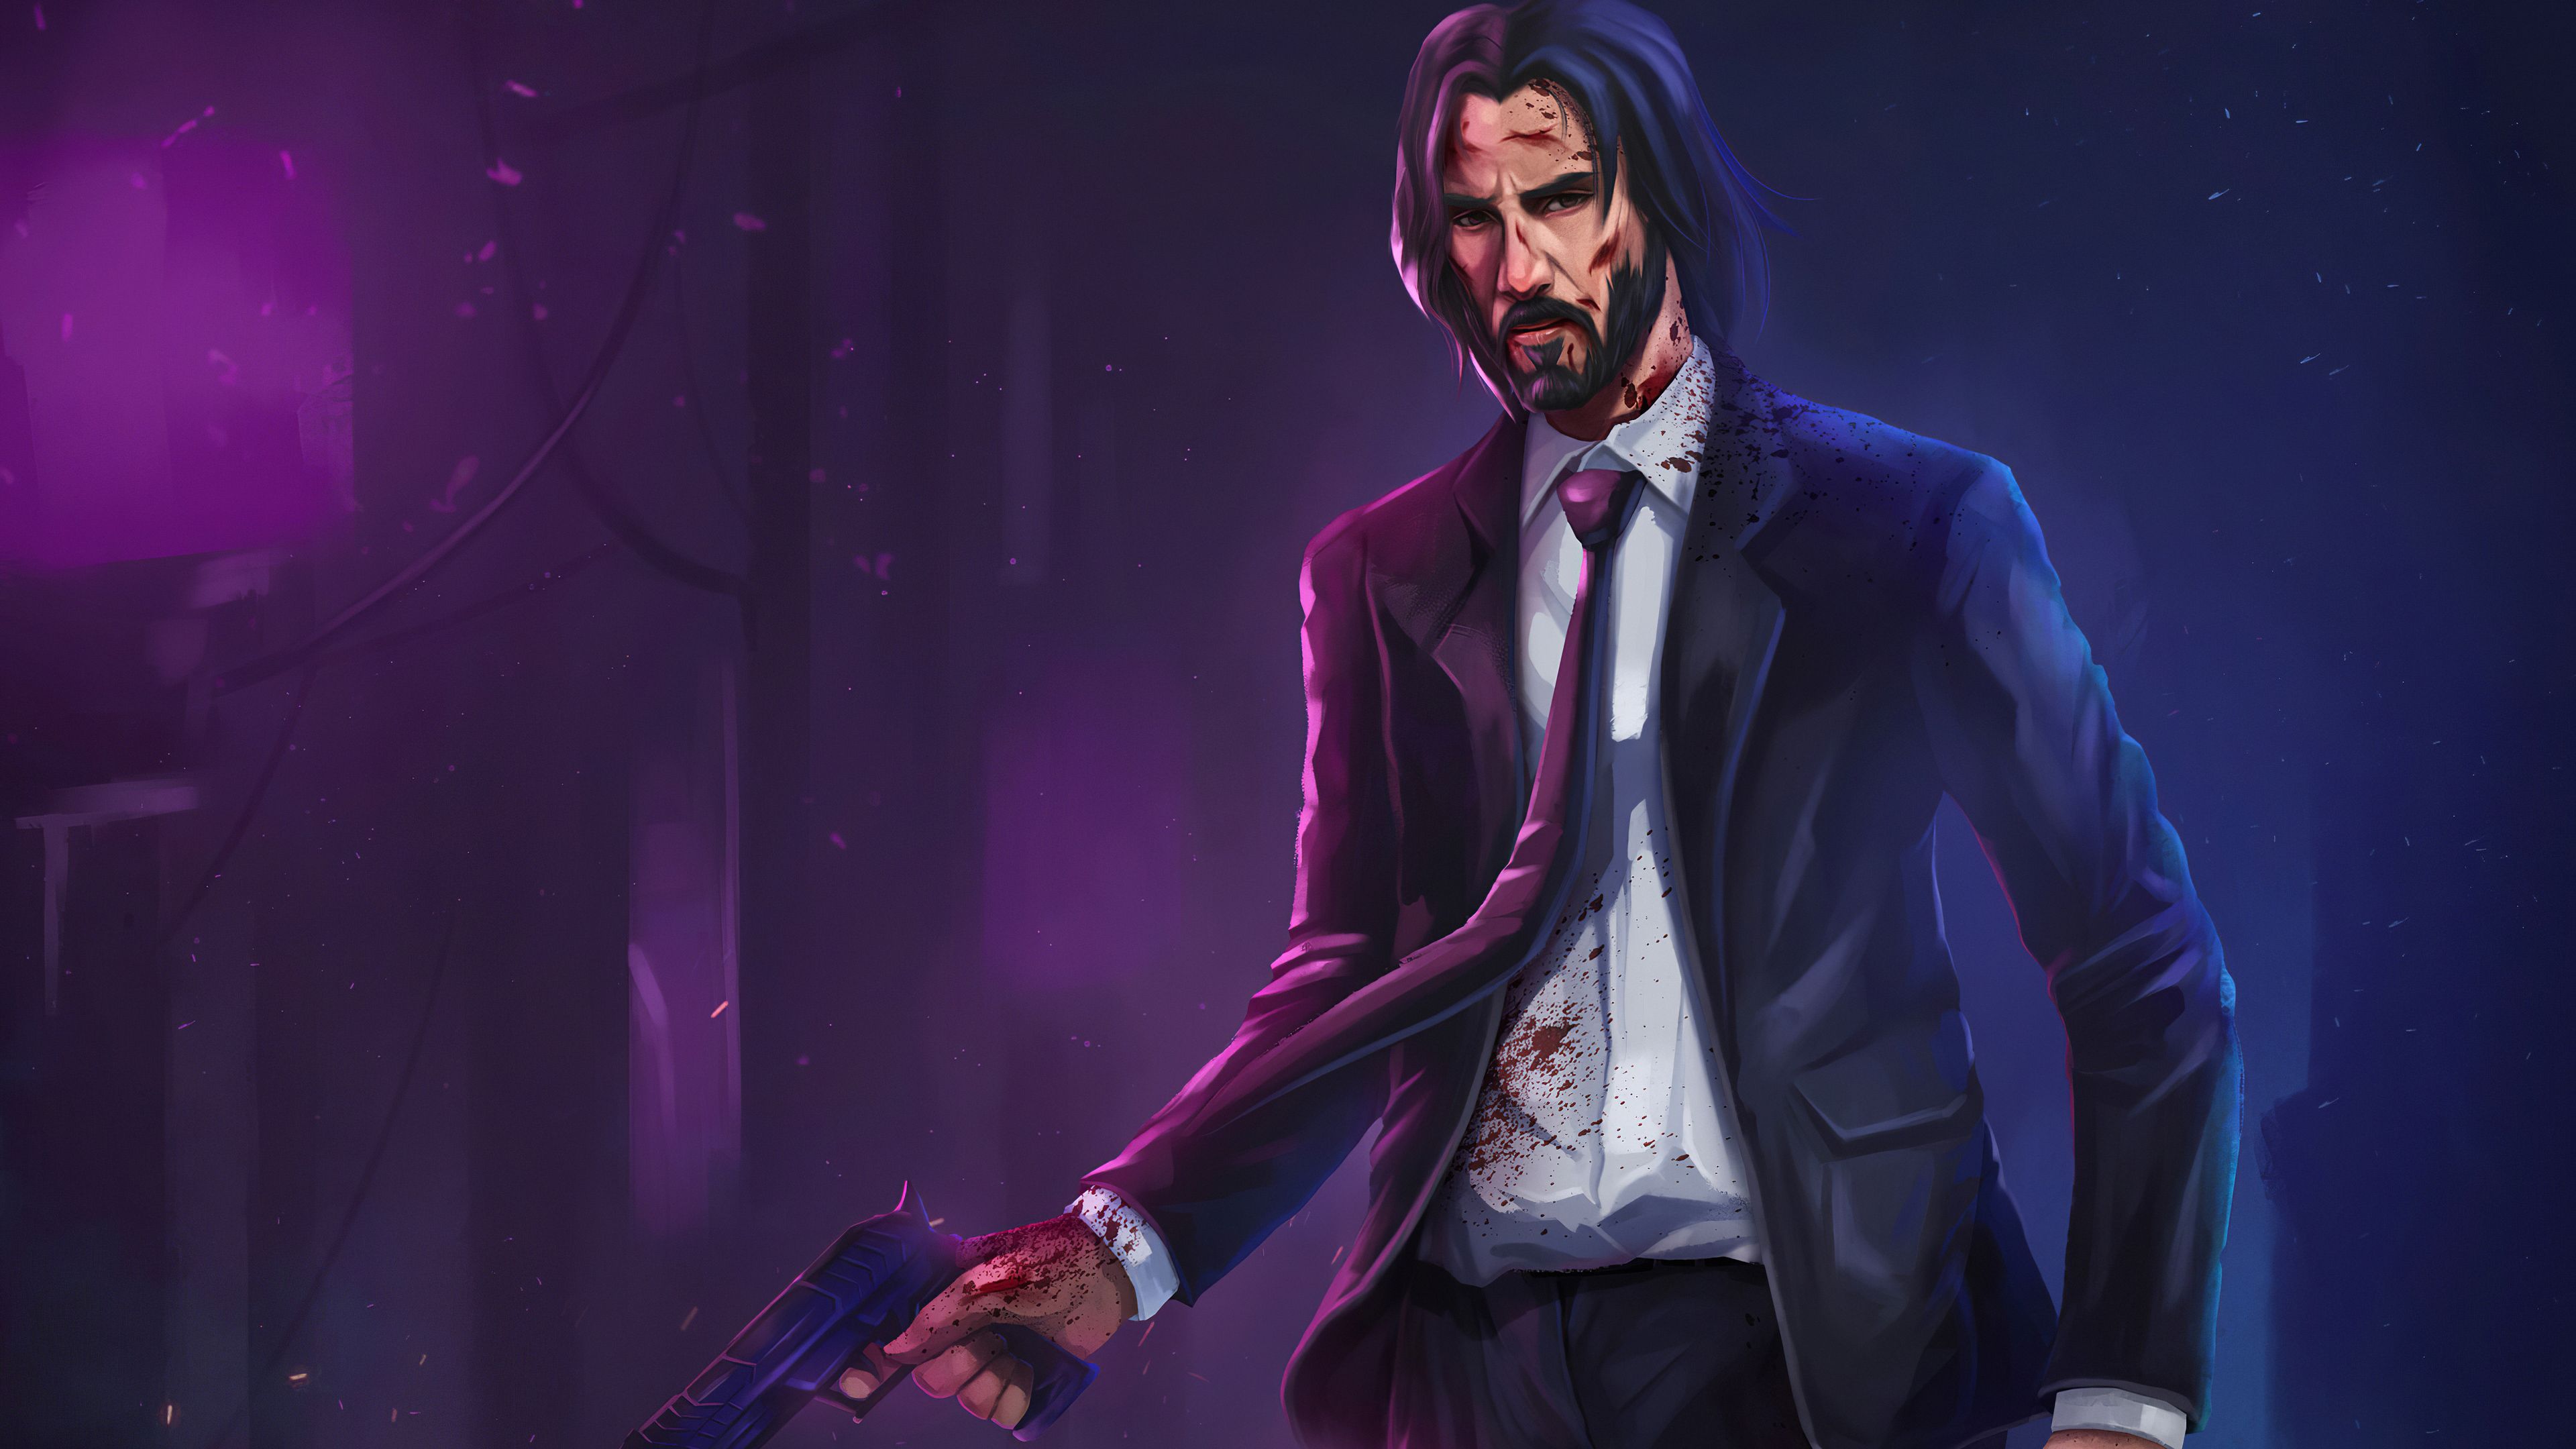 John Wick Wallpaper 4K For Pc / It is very popular to decorate the background of mac, windows, desktop or android device